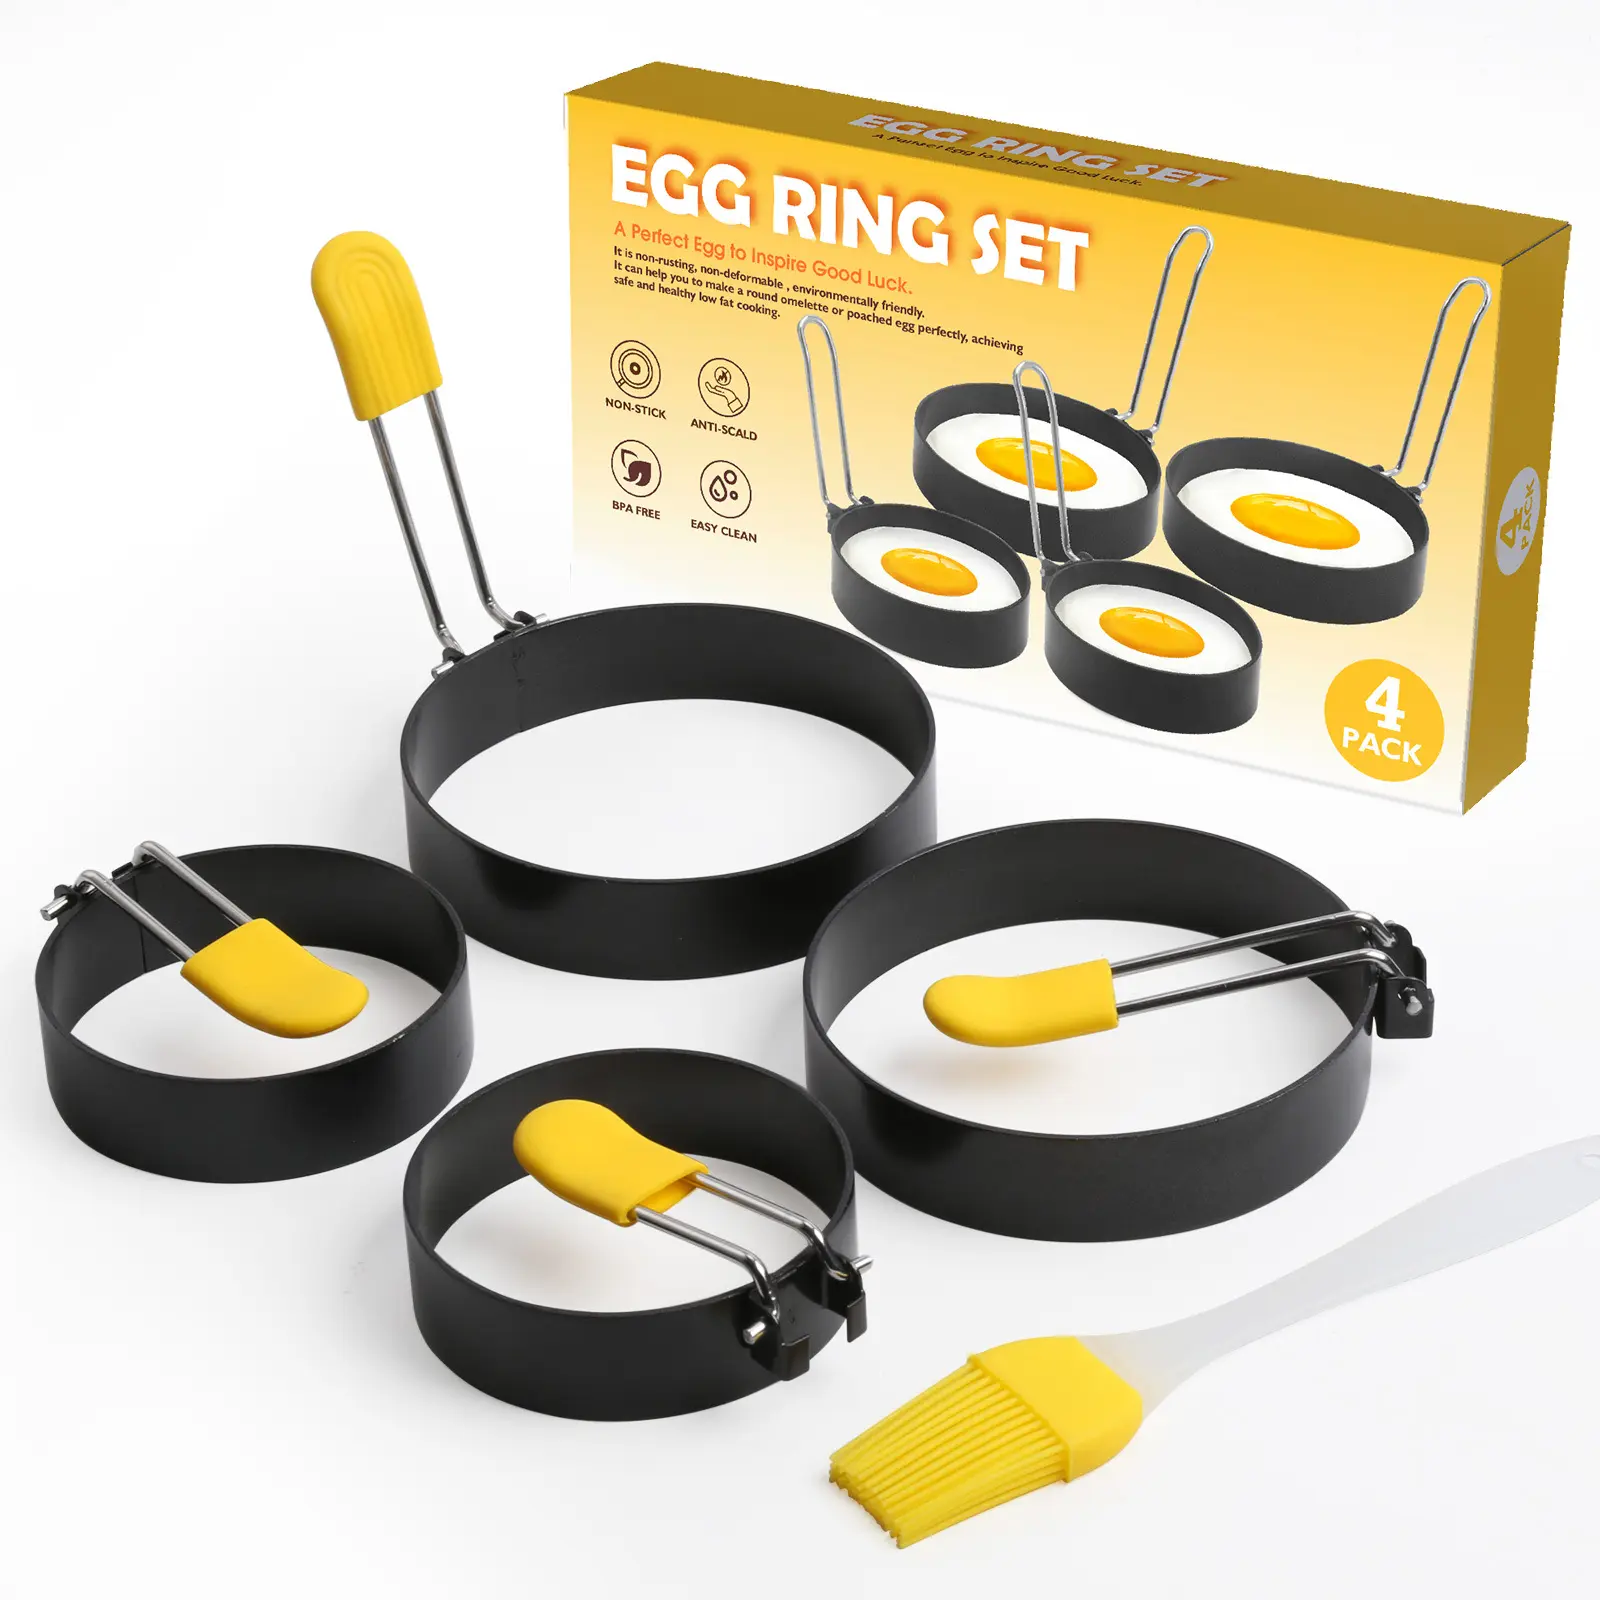 4 piece Stainless Steel Egg Cooking Rings Pancake Mold for frying Eggs and Omelet